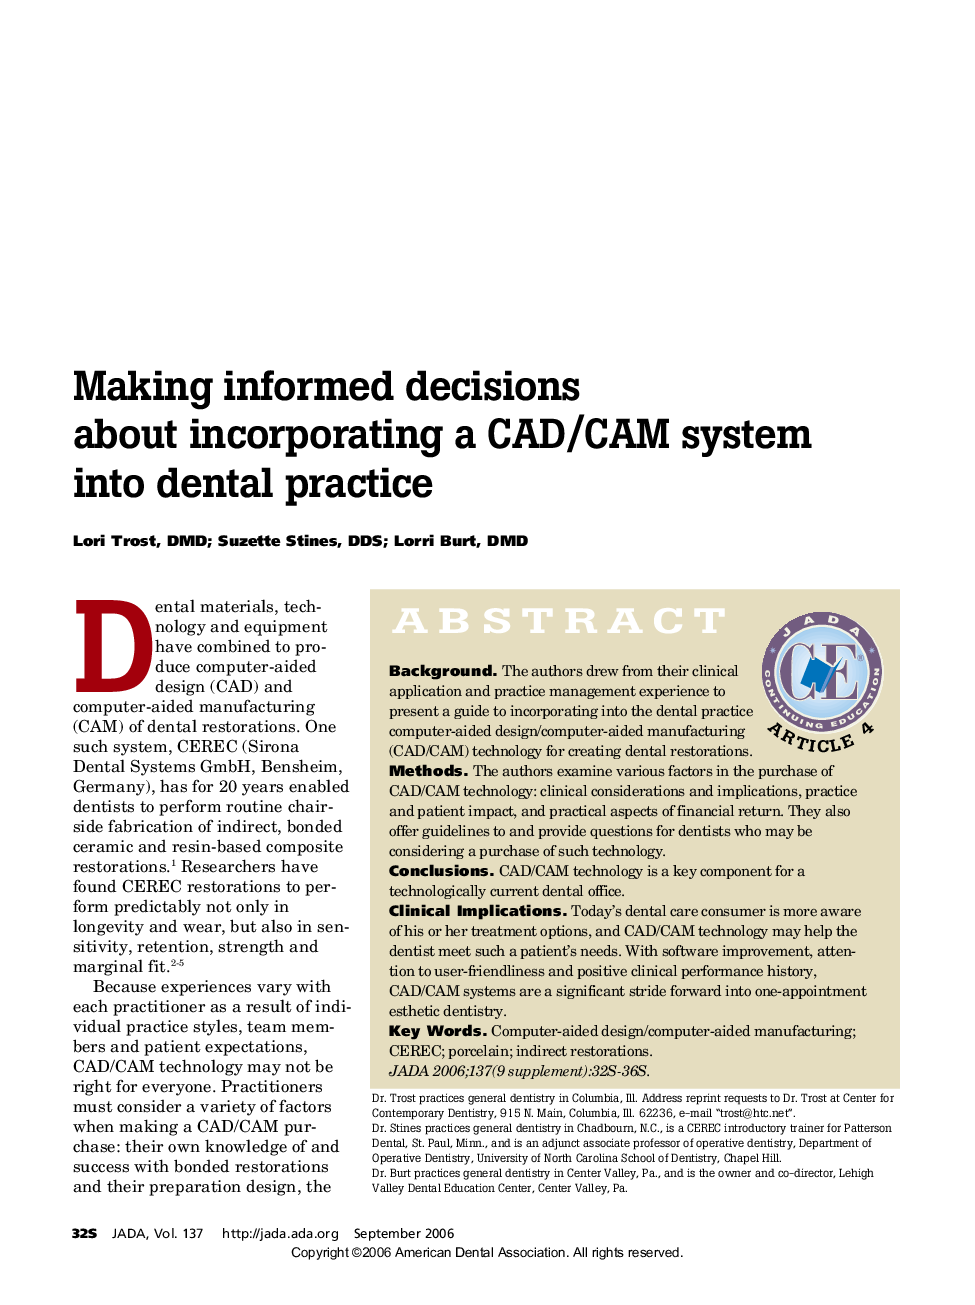 Making informed decisions about incorporating a CAD/CAM system into dental practice